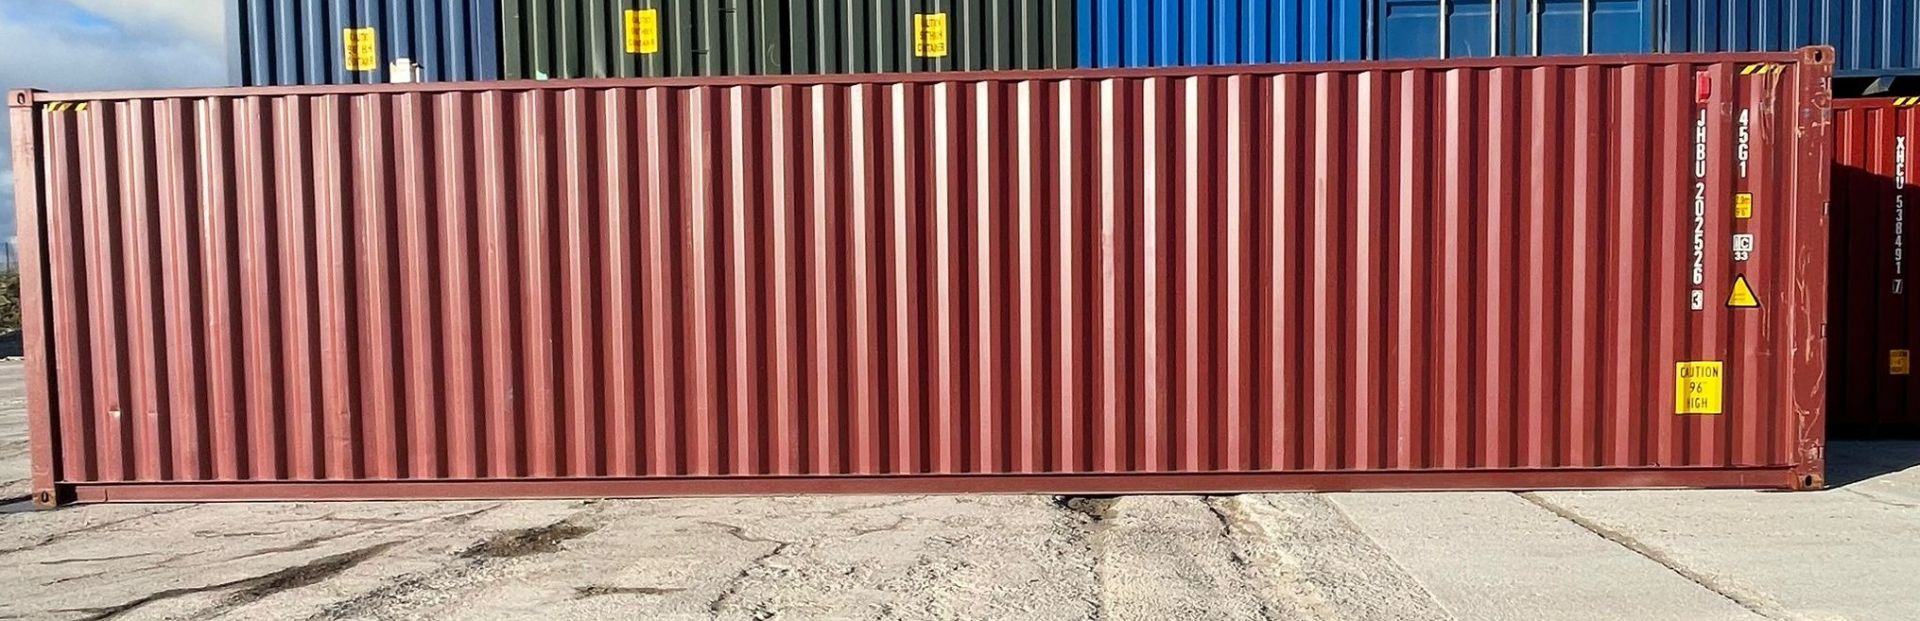 NO RESERVE - 40ft HC Shipping Container - ref JHBU2025263 - Image 6 of 6